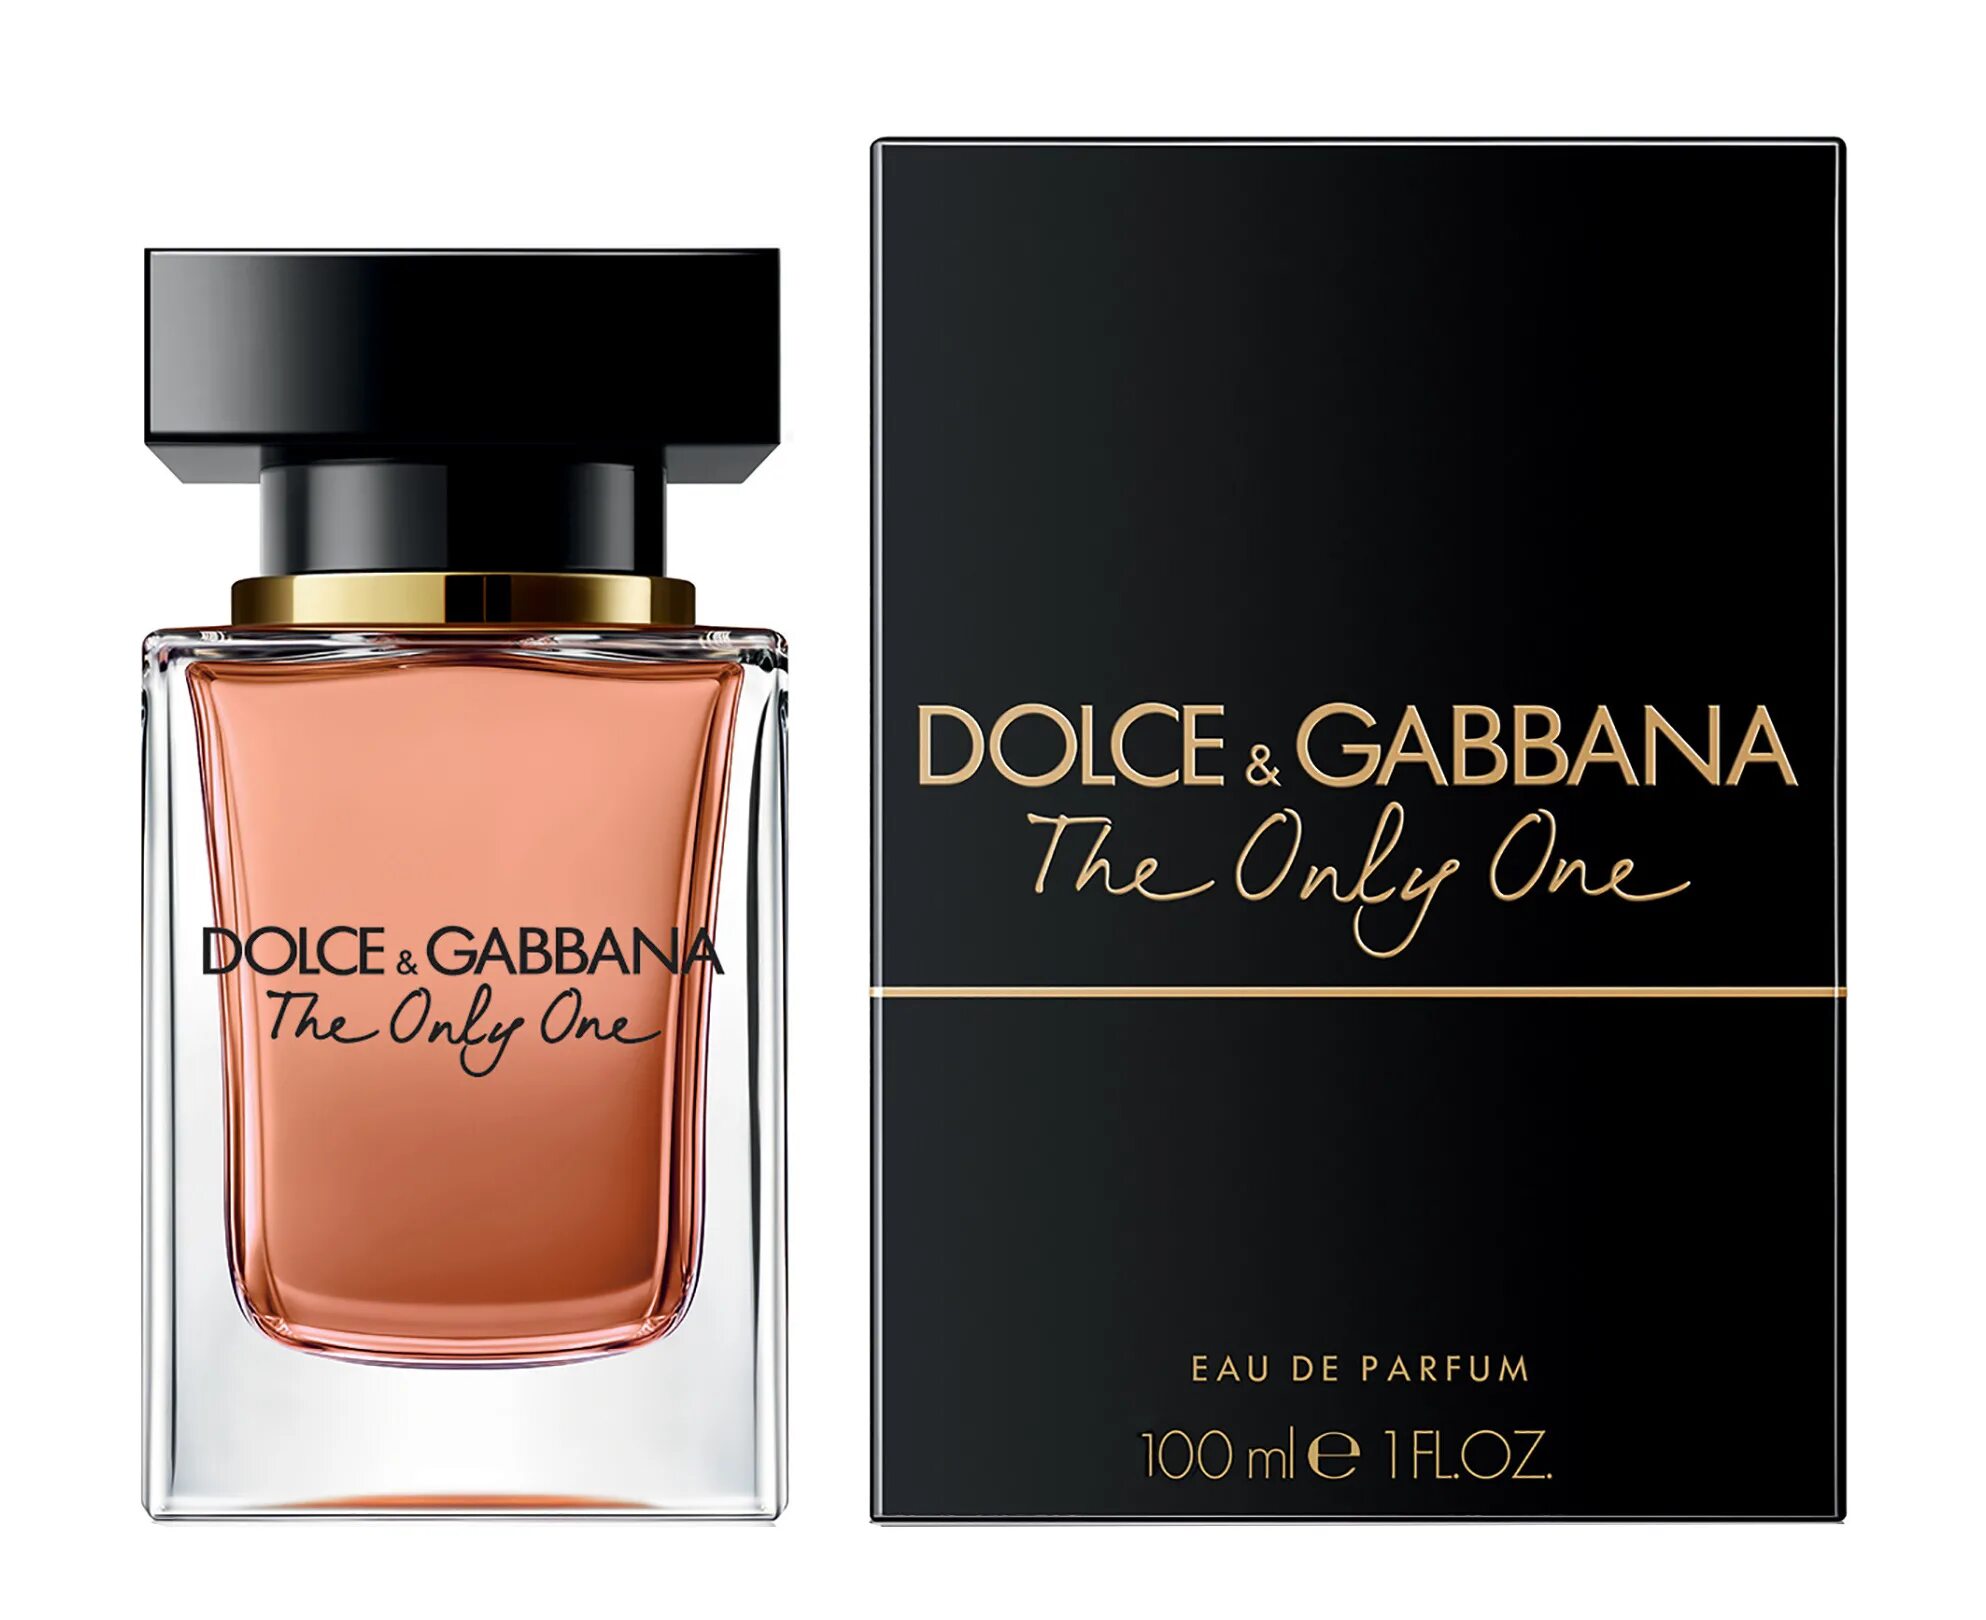 Dolce & Gabbana the only one, EDP., 100 ml. Dolce & Gabbana the only one EDP 50 ml. Dolce Gabbana the only one 100ml. Dolce Gabbana the only one 50ml. Духи dolce only one